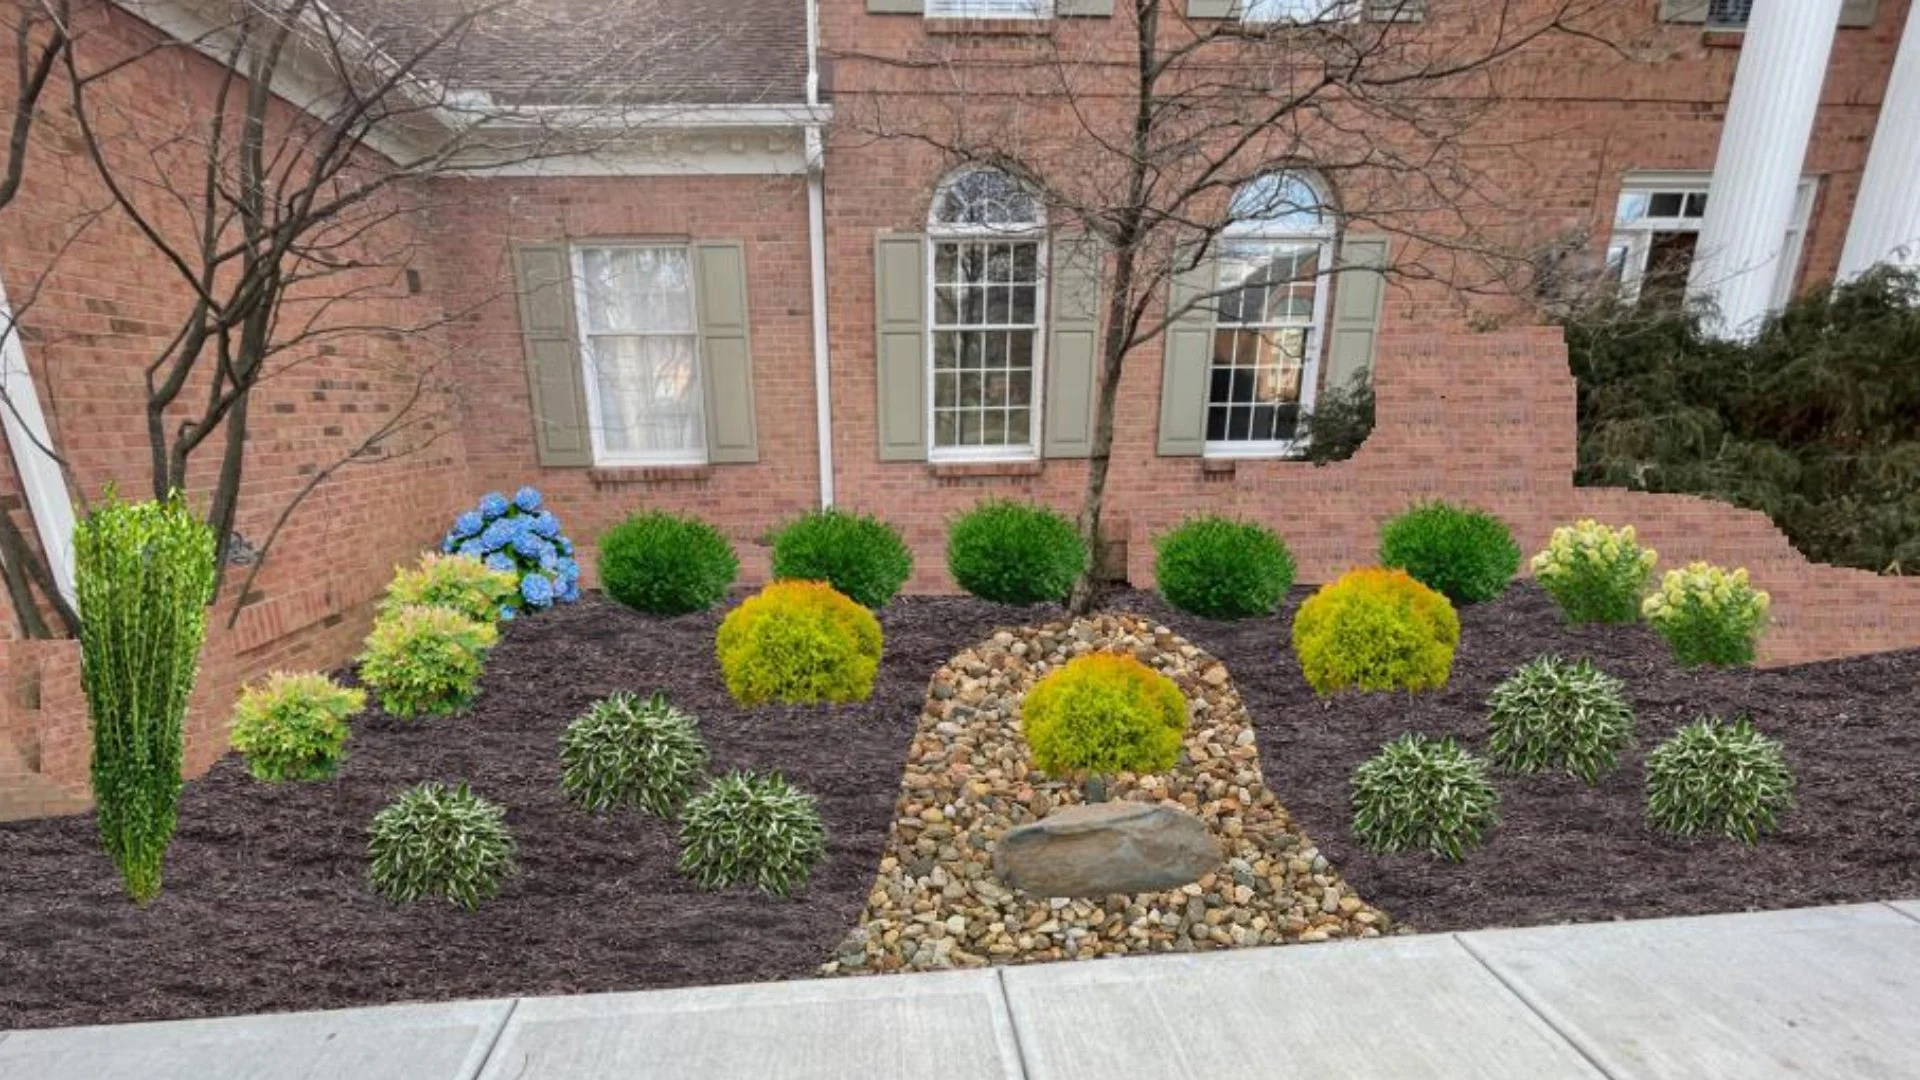 Prepare Yourself: Here's What to Expect With a Landscape Design Service